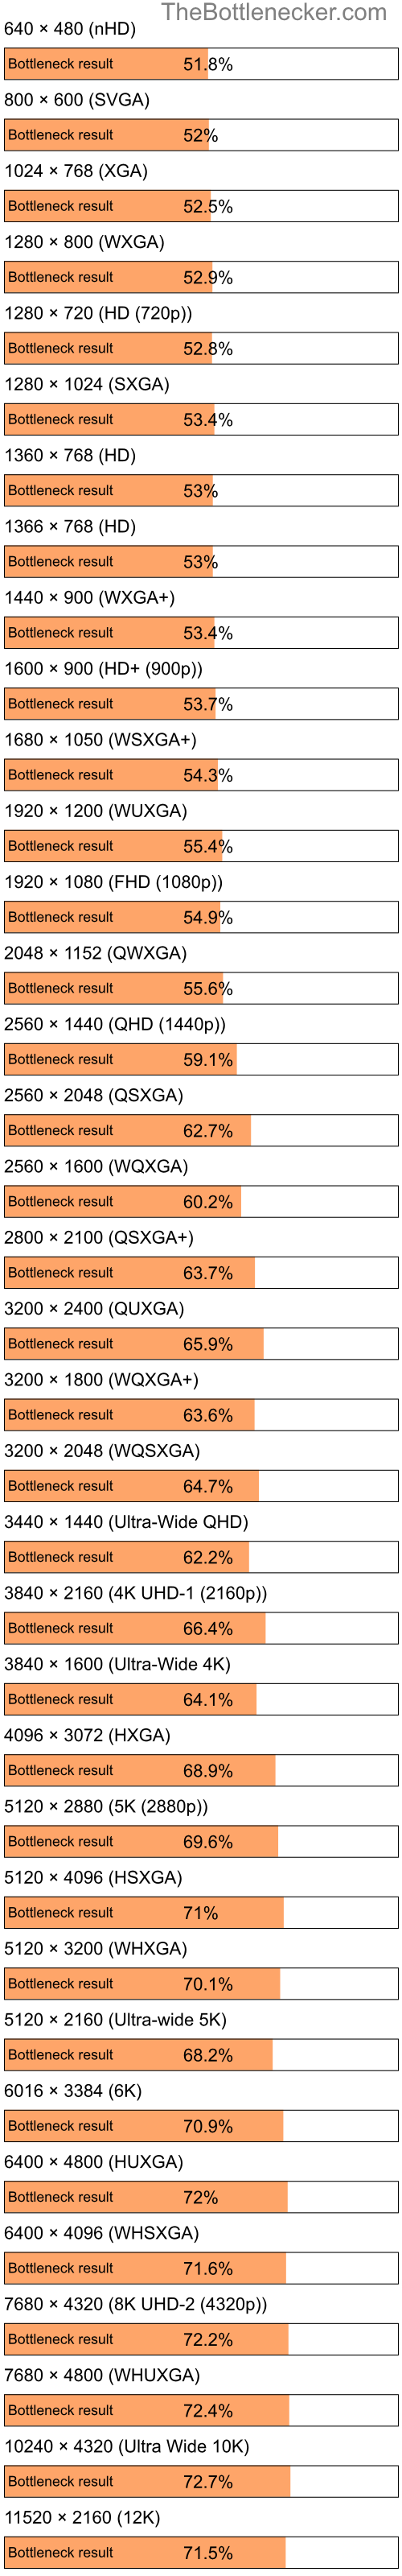 Bottleneck results by resolution for Intel Pentium 4 and AMD Mobility Radeon X1700 in Processor Intense Tasks